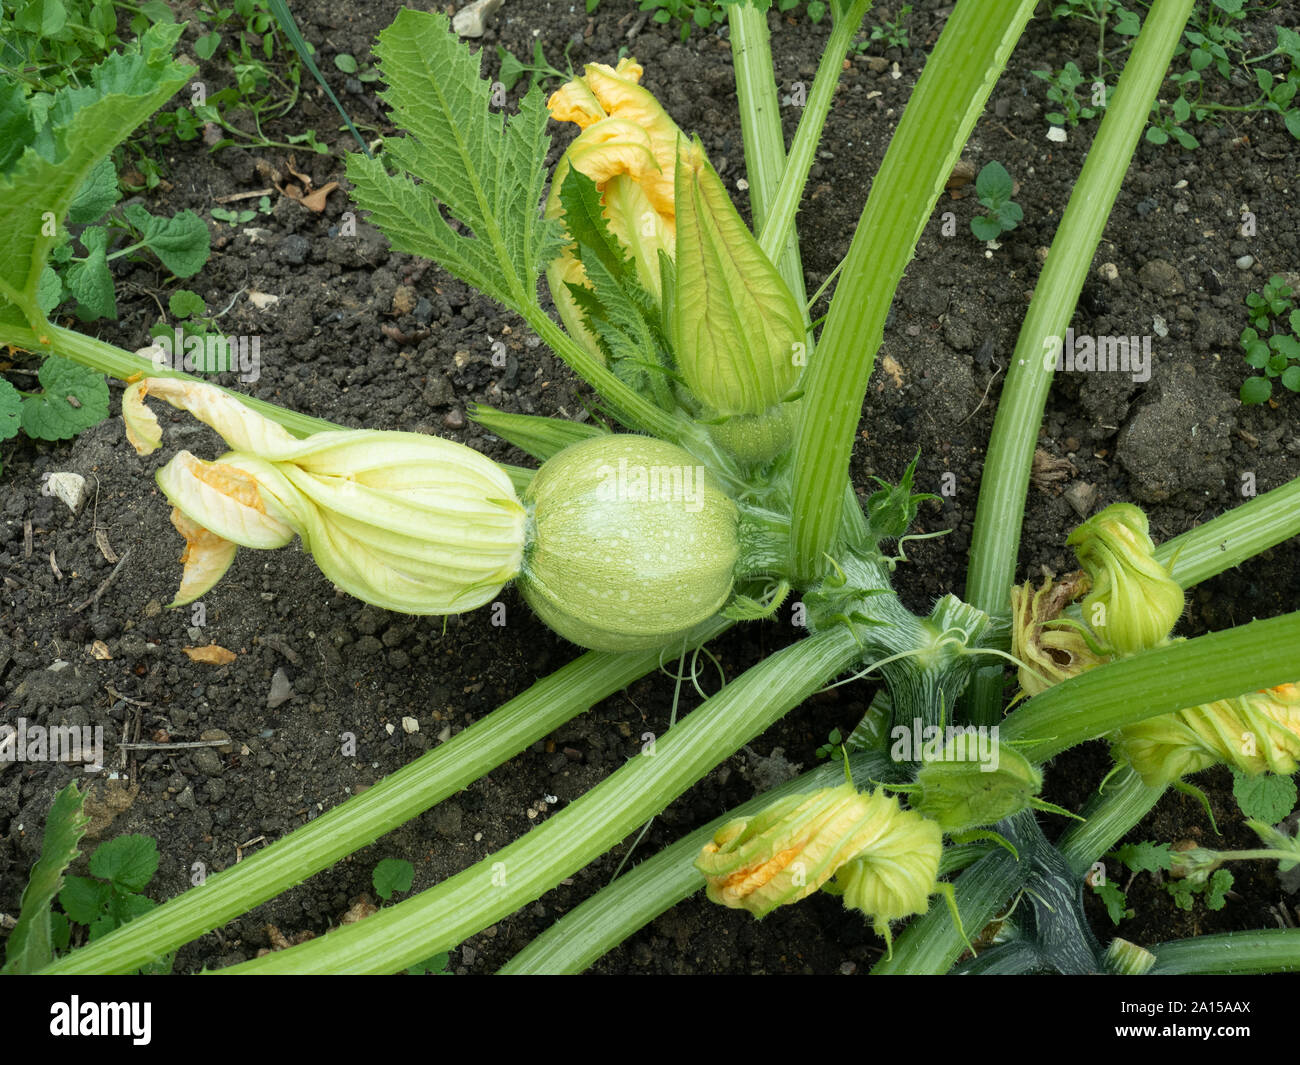 A developing courgette of the unusual round variety Tondo di Piacenza Stock Photo